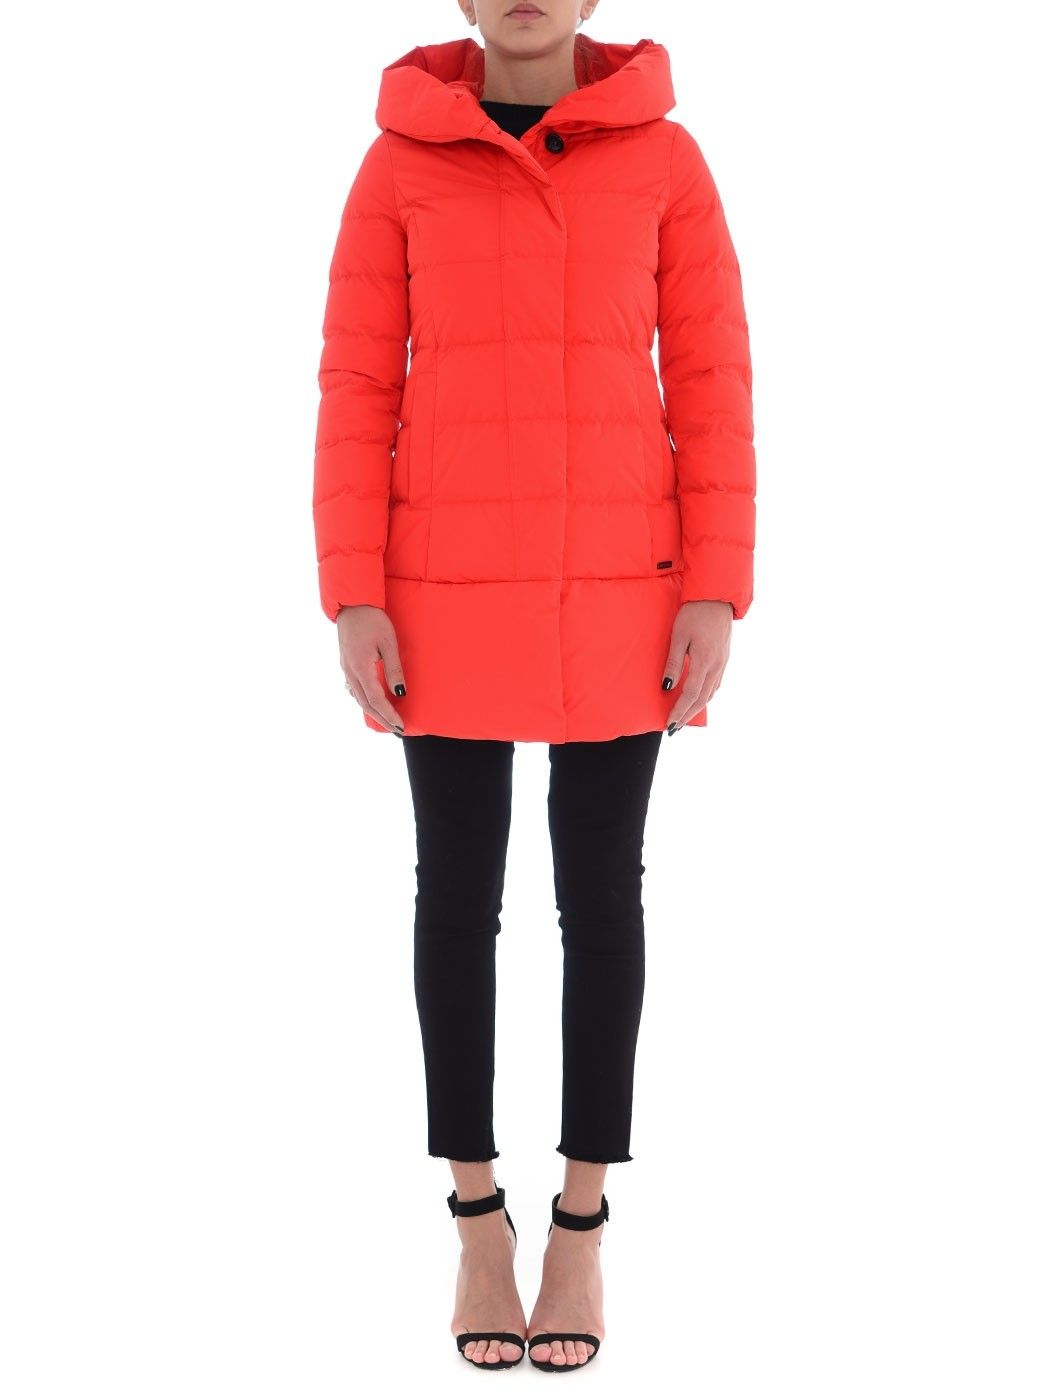  down jackets,removable hoods,WOMEN DOWN JACKETS,MONCLER PADDED JACKETS,WOOLRICH ARCTIC PARKA,HERNO DOWN JACKETS  WOOLRICH WWOU0512FR